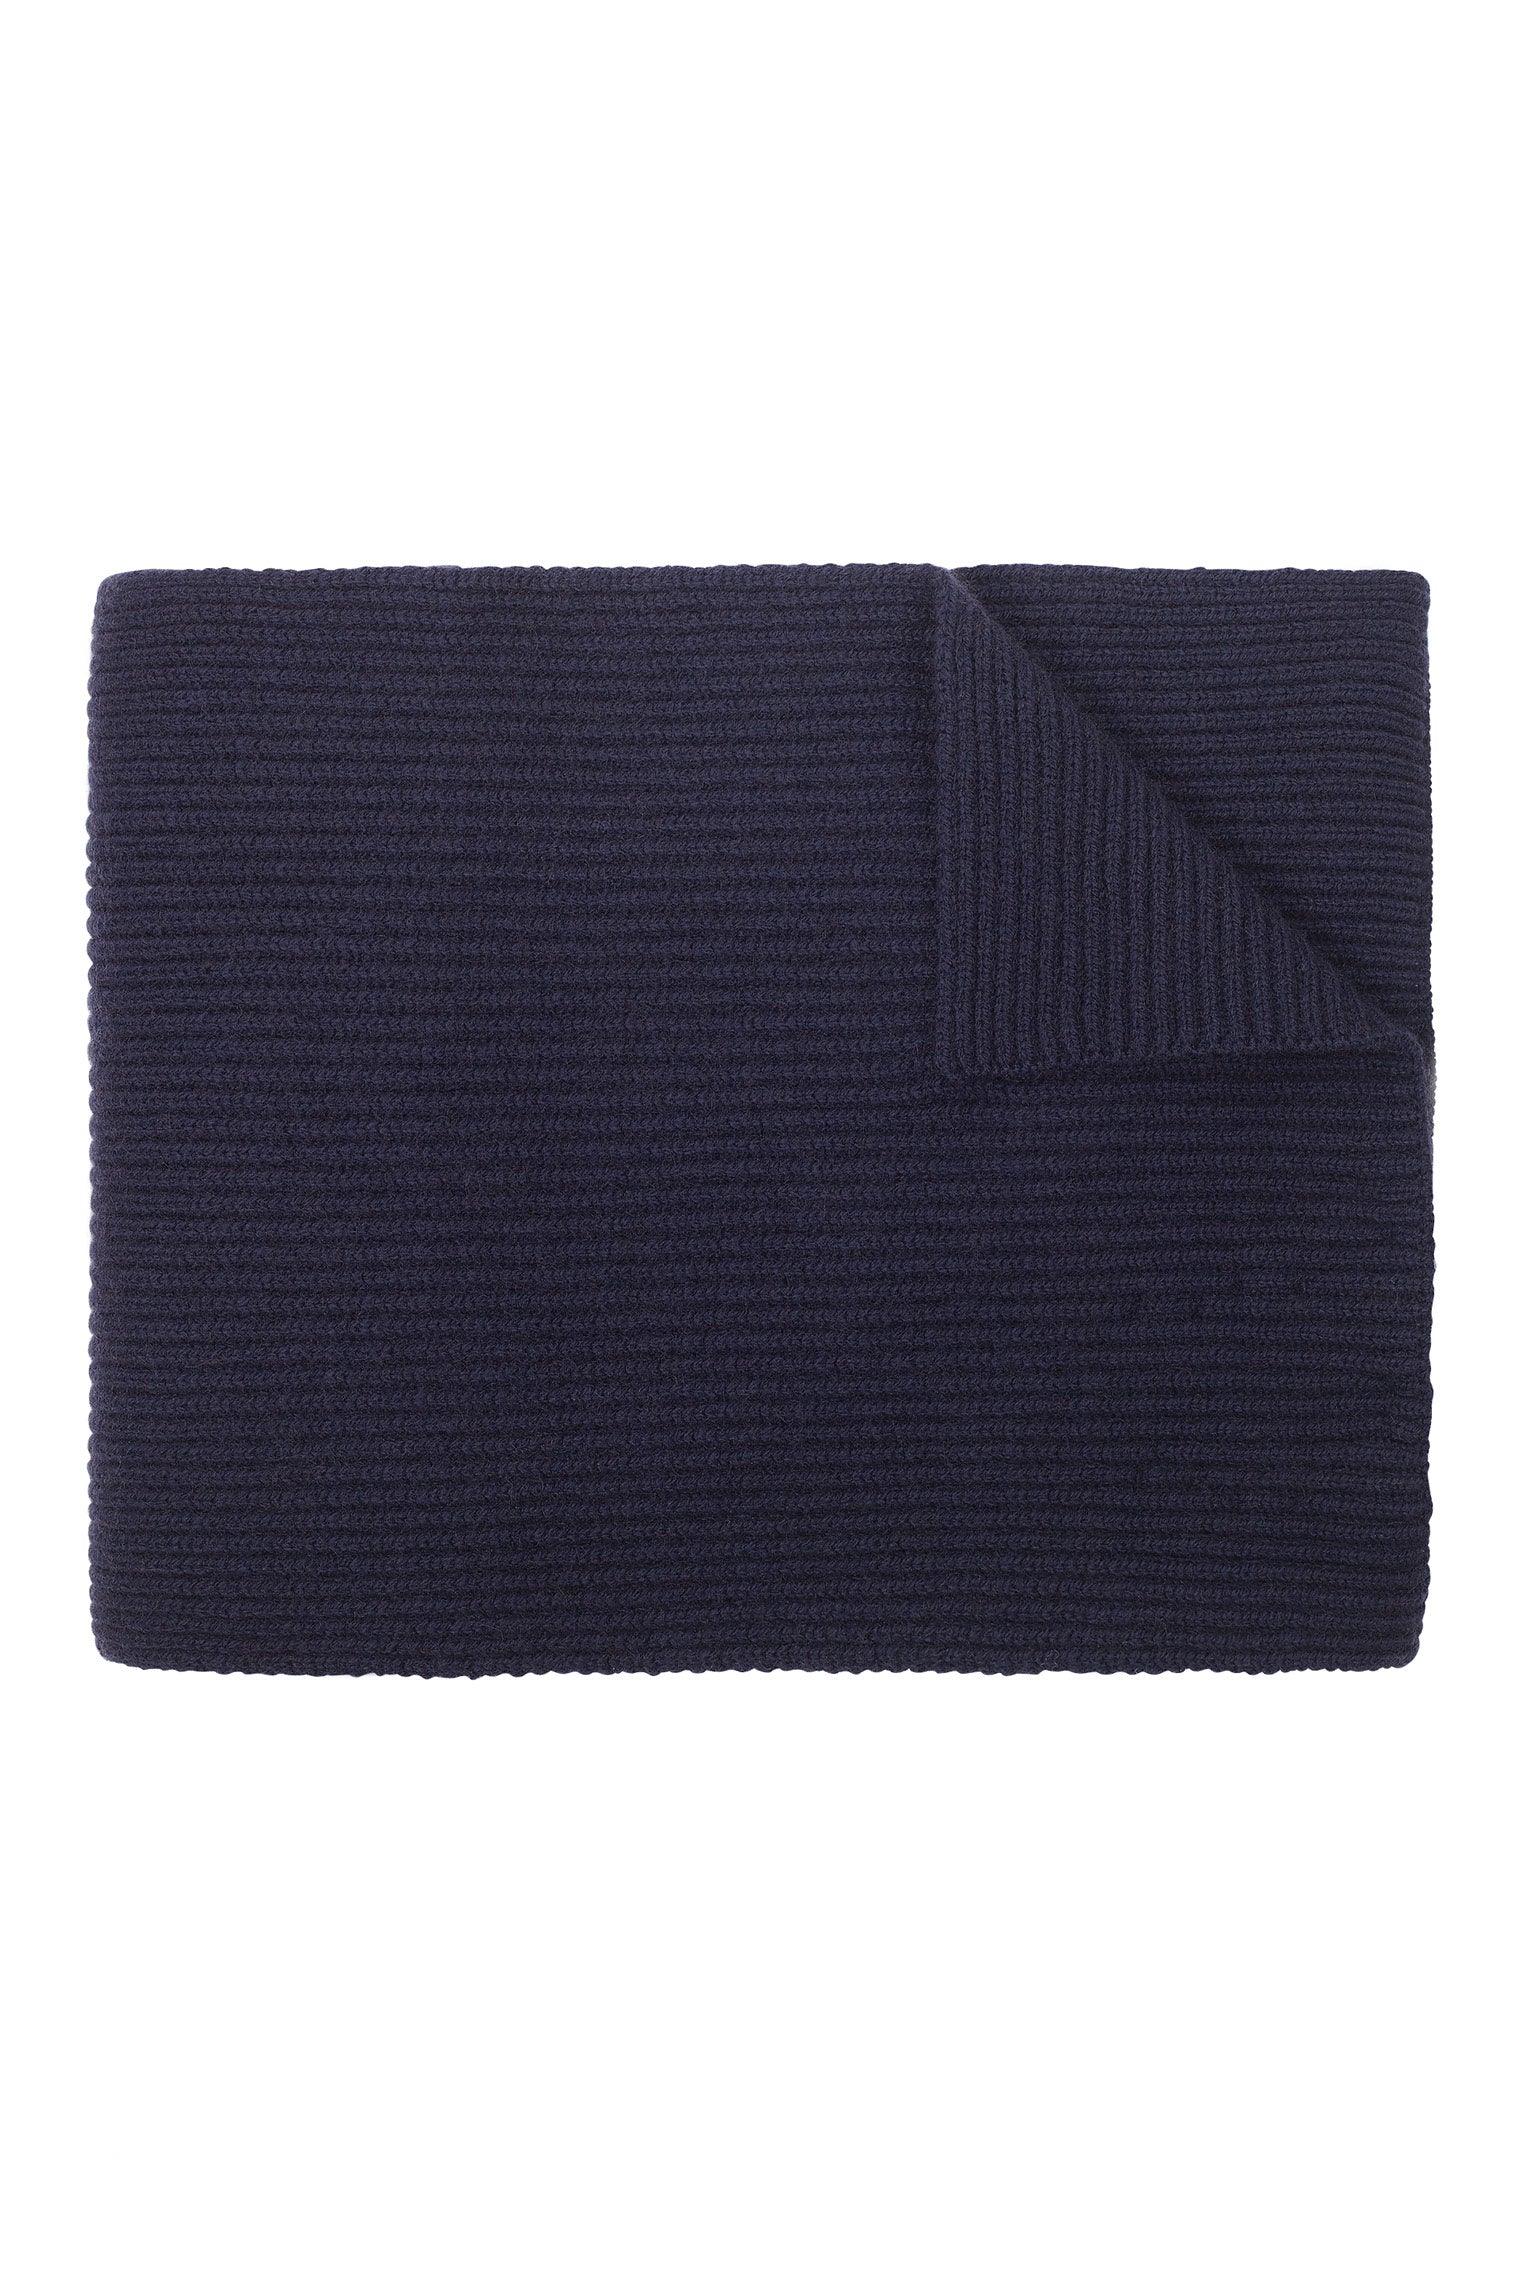 Cashmere Knitted Scarf - Products - Lock & Co. Hatters London UK